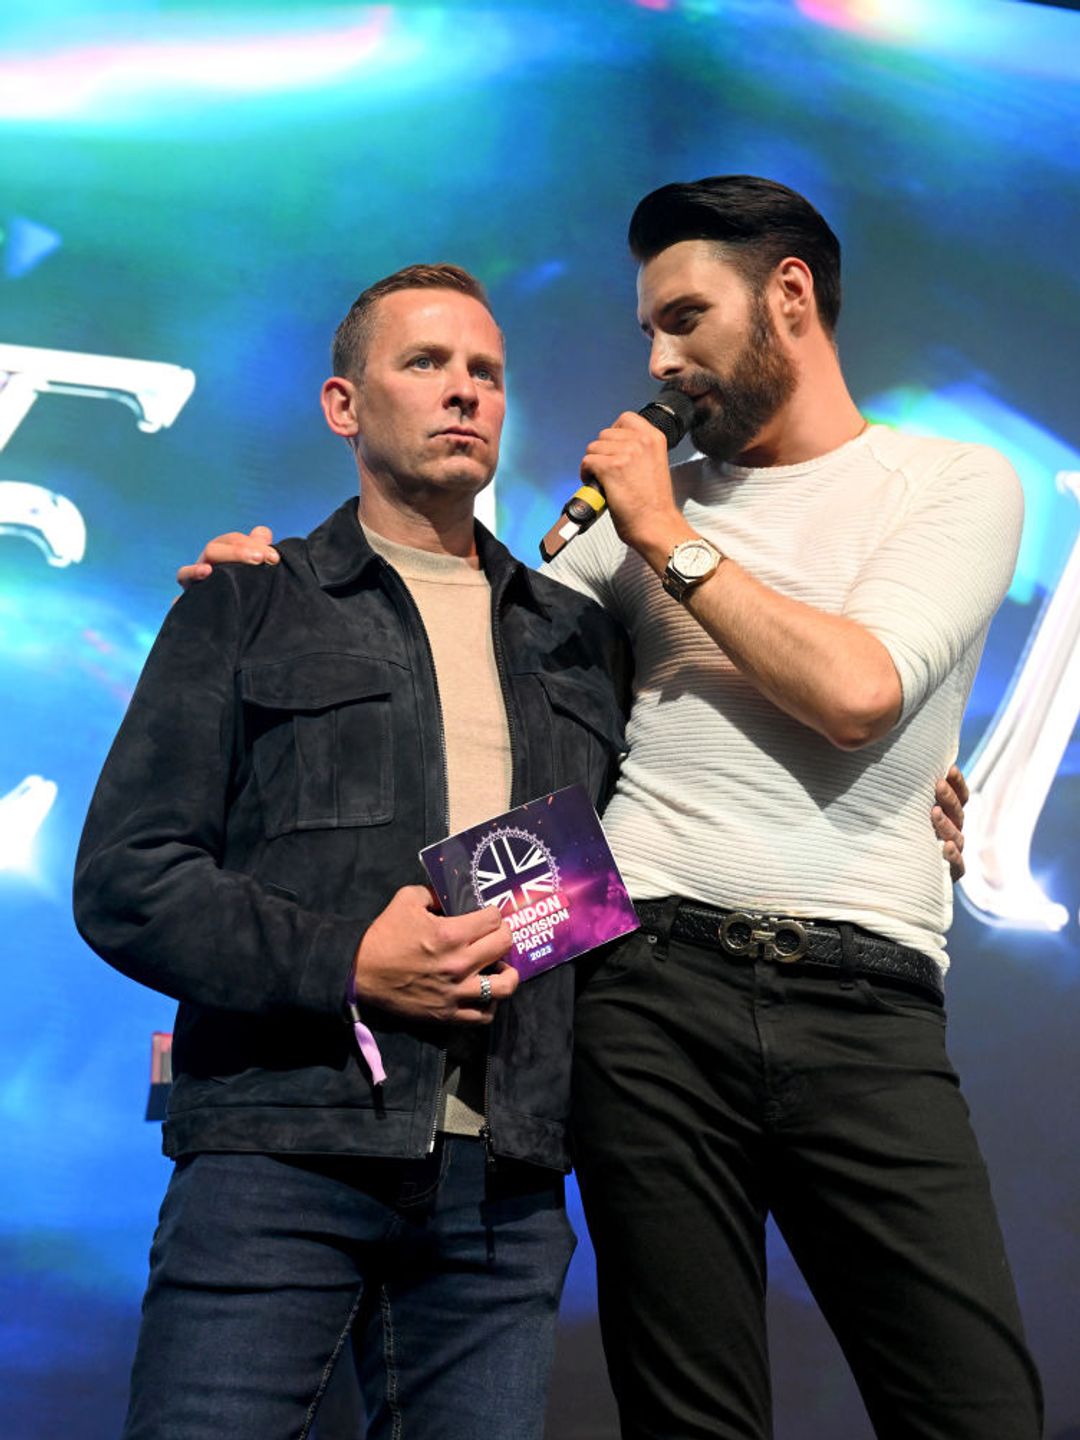 Rylan and his co-star Scott Mills will present the Eurovision Song Contest Grand Final to Radio 2 listeners